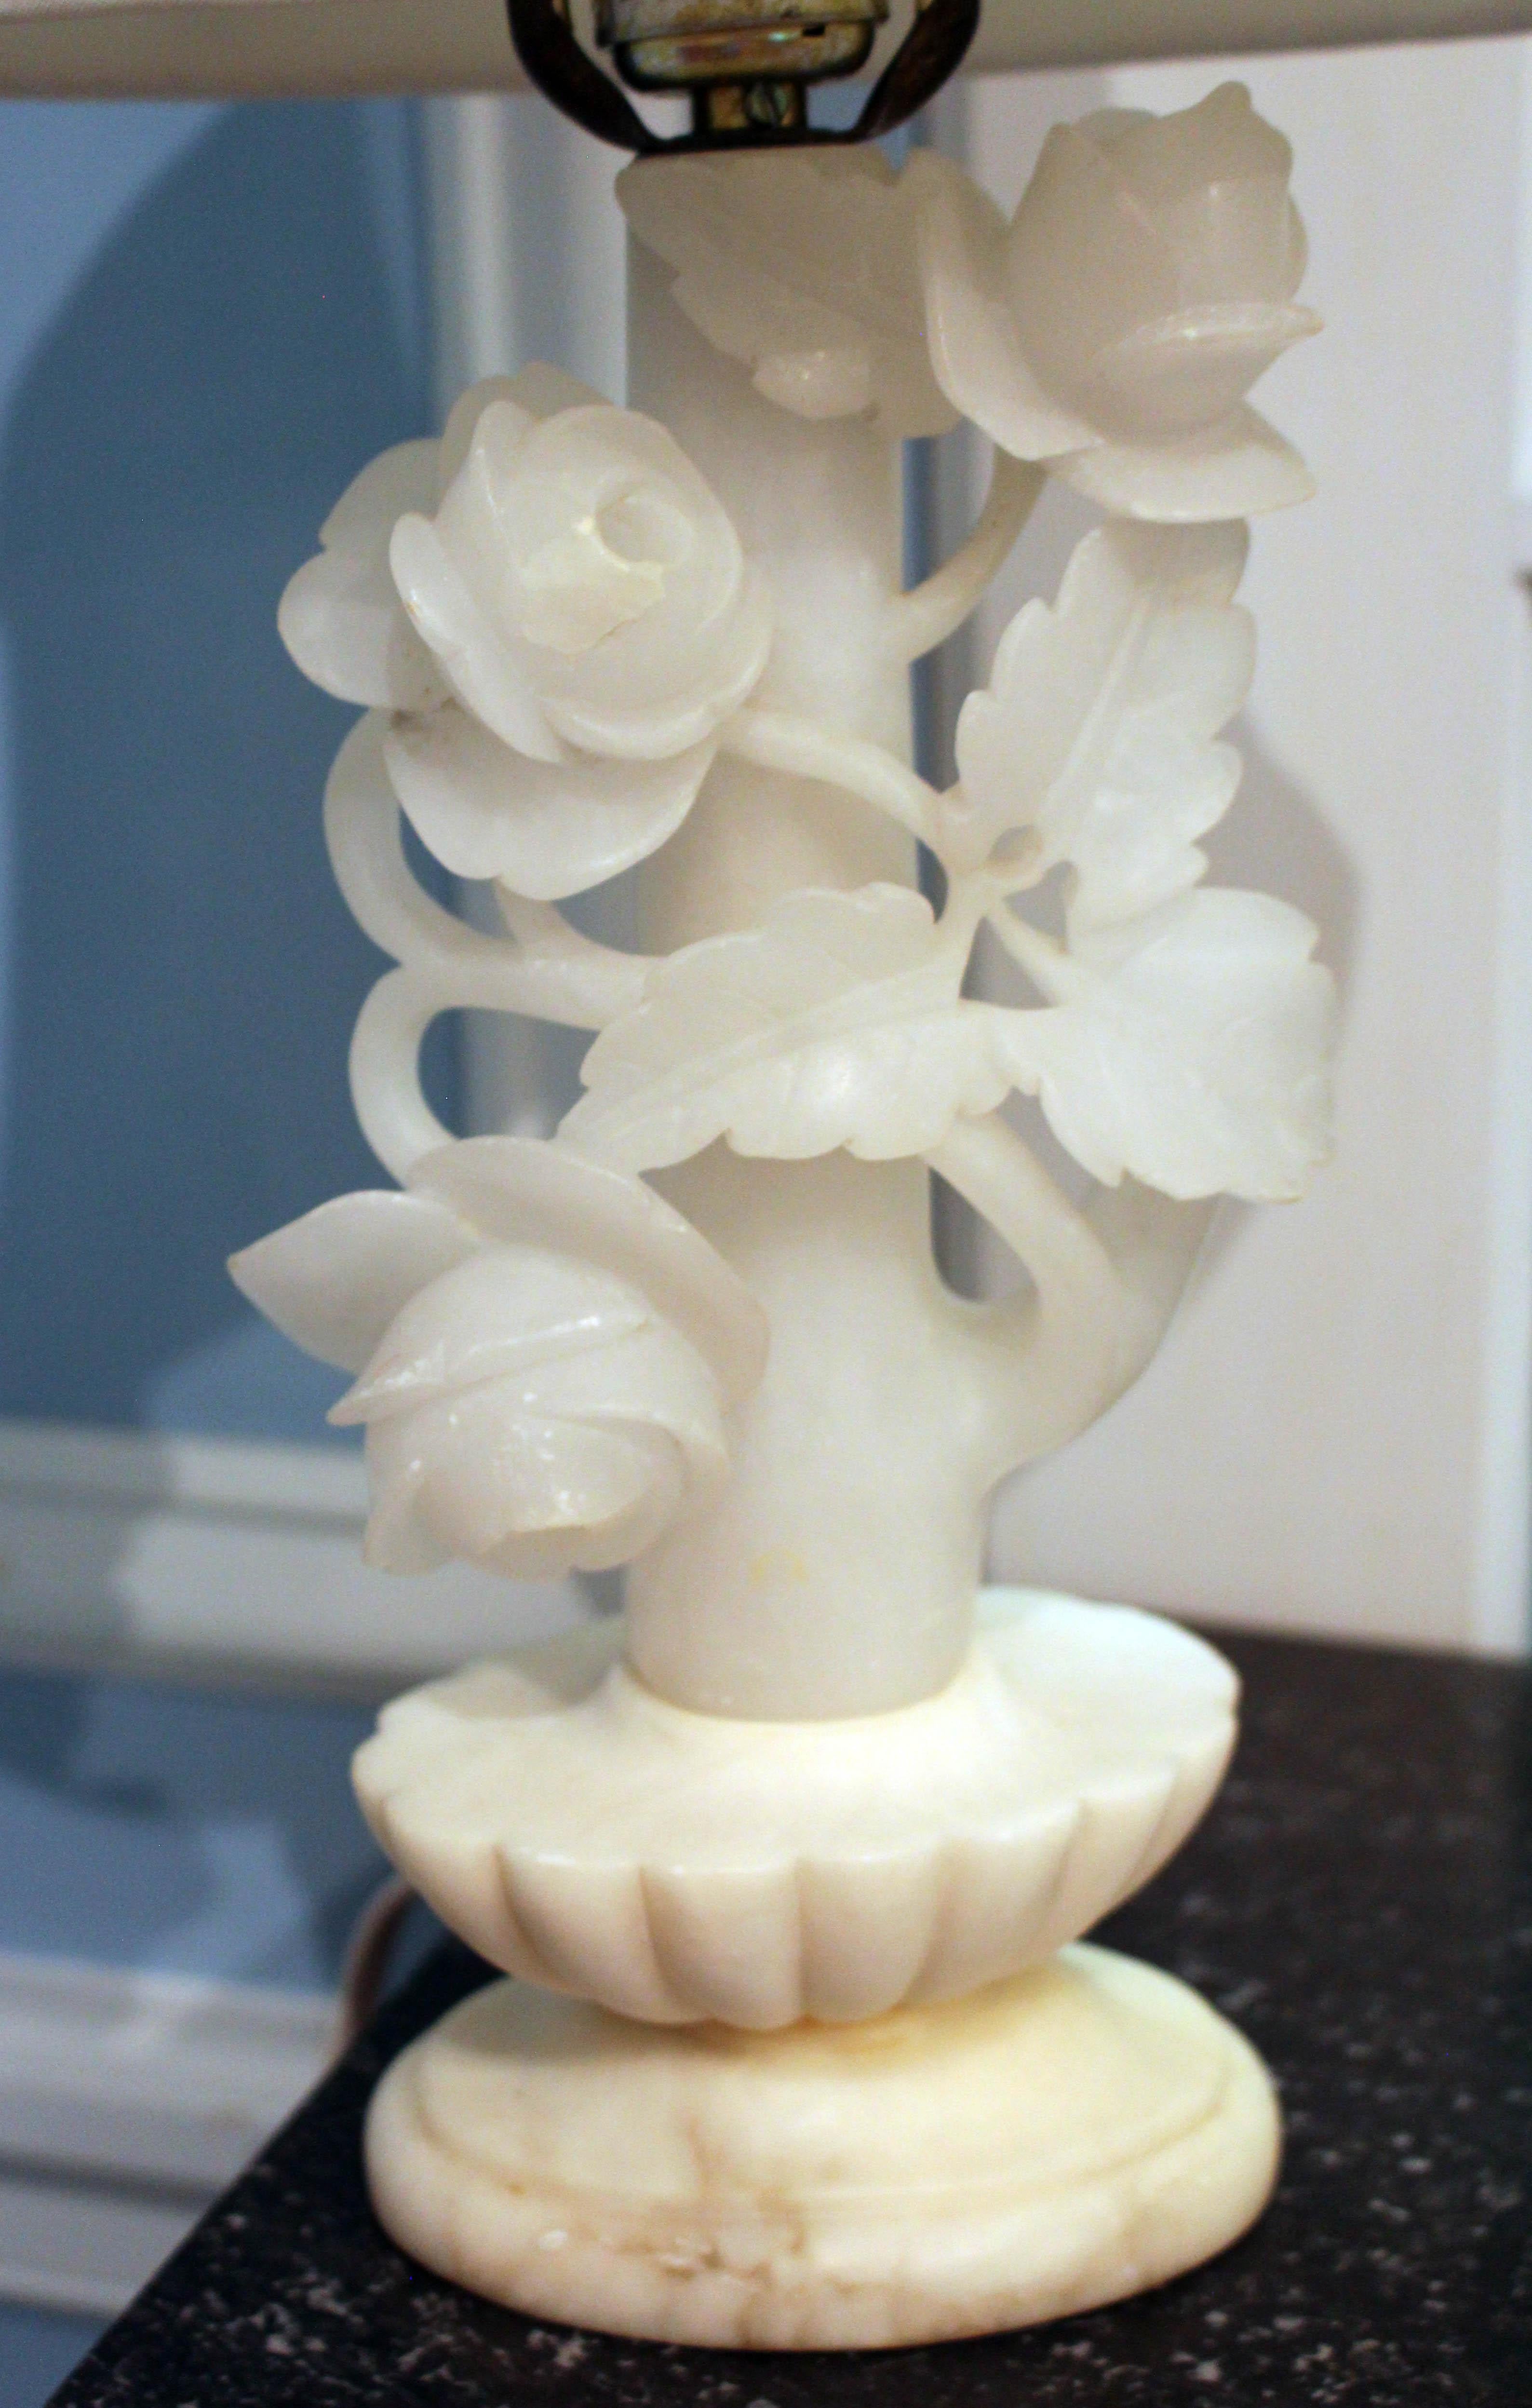 A charming rose carved alabaster lamp - from an oval classical base emerge an entwined 